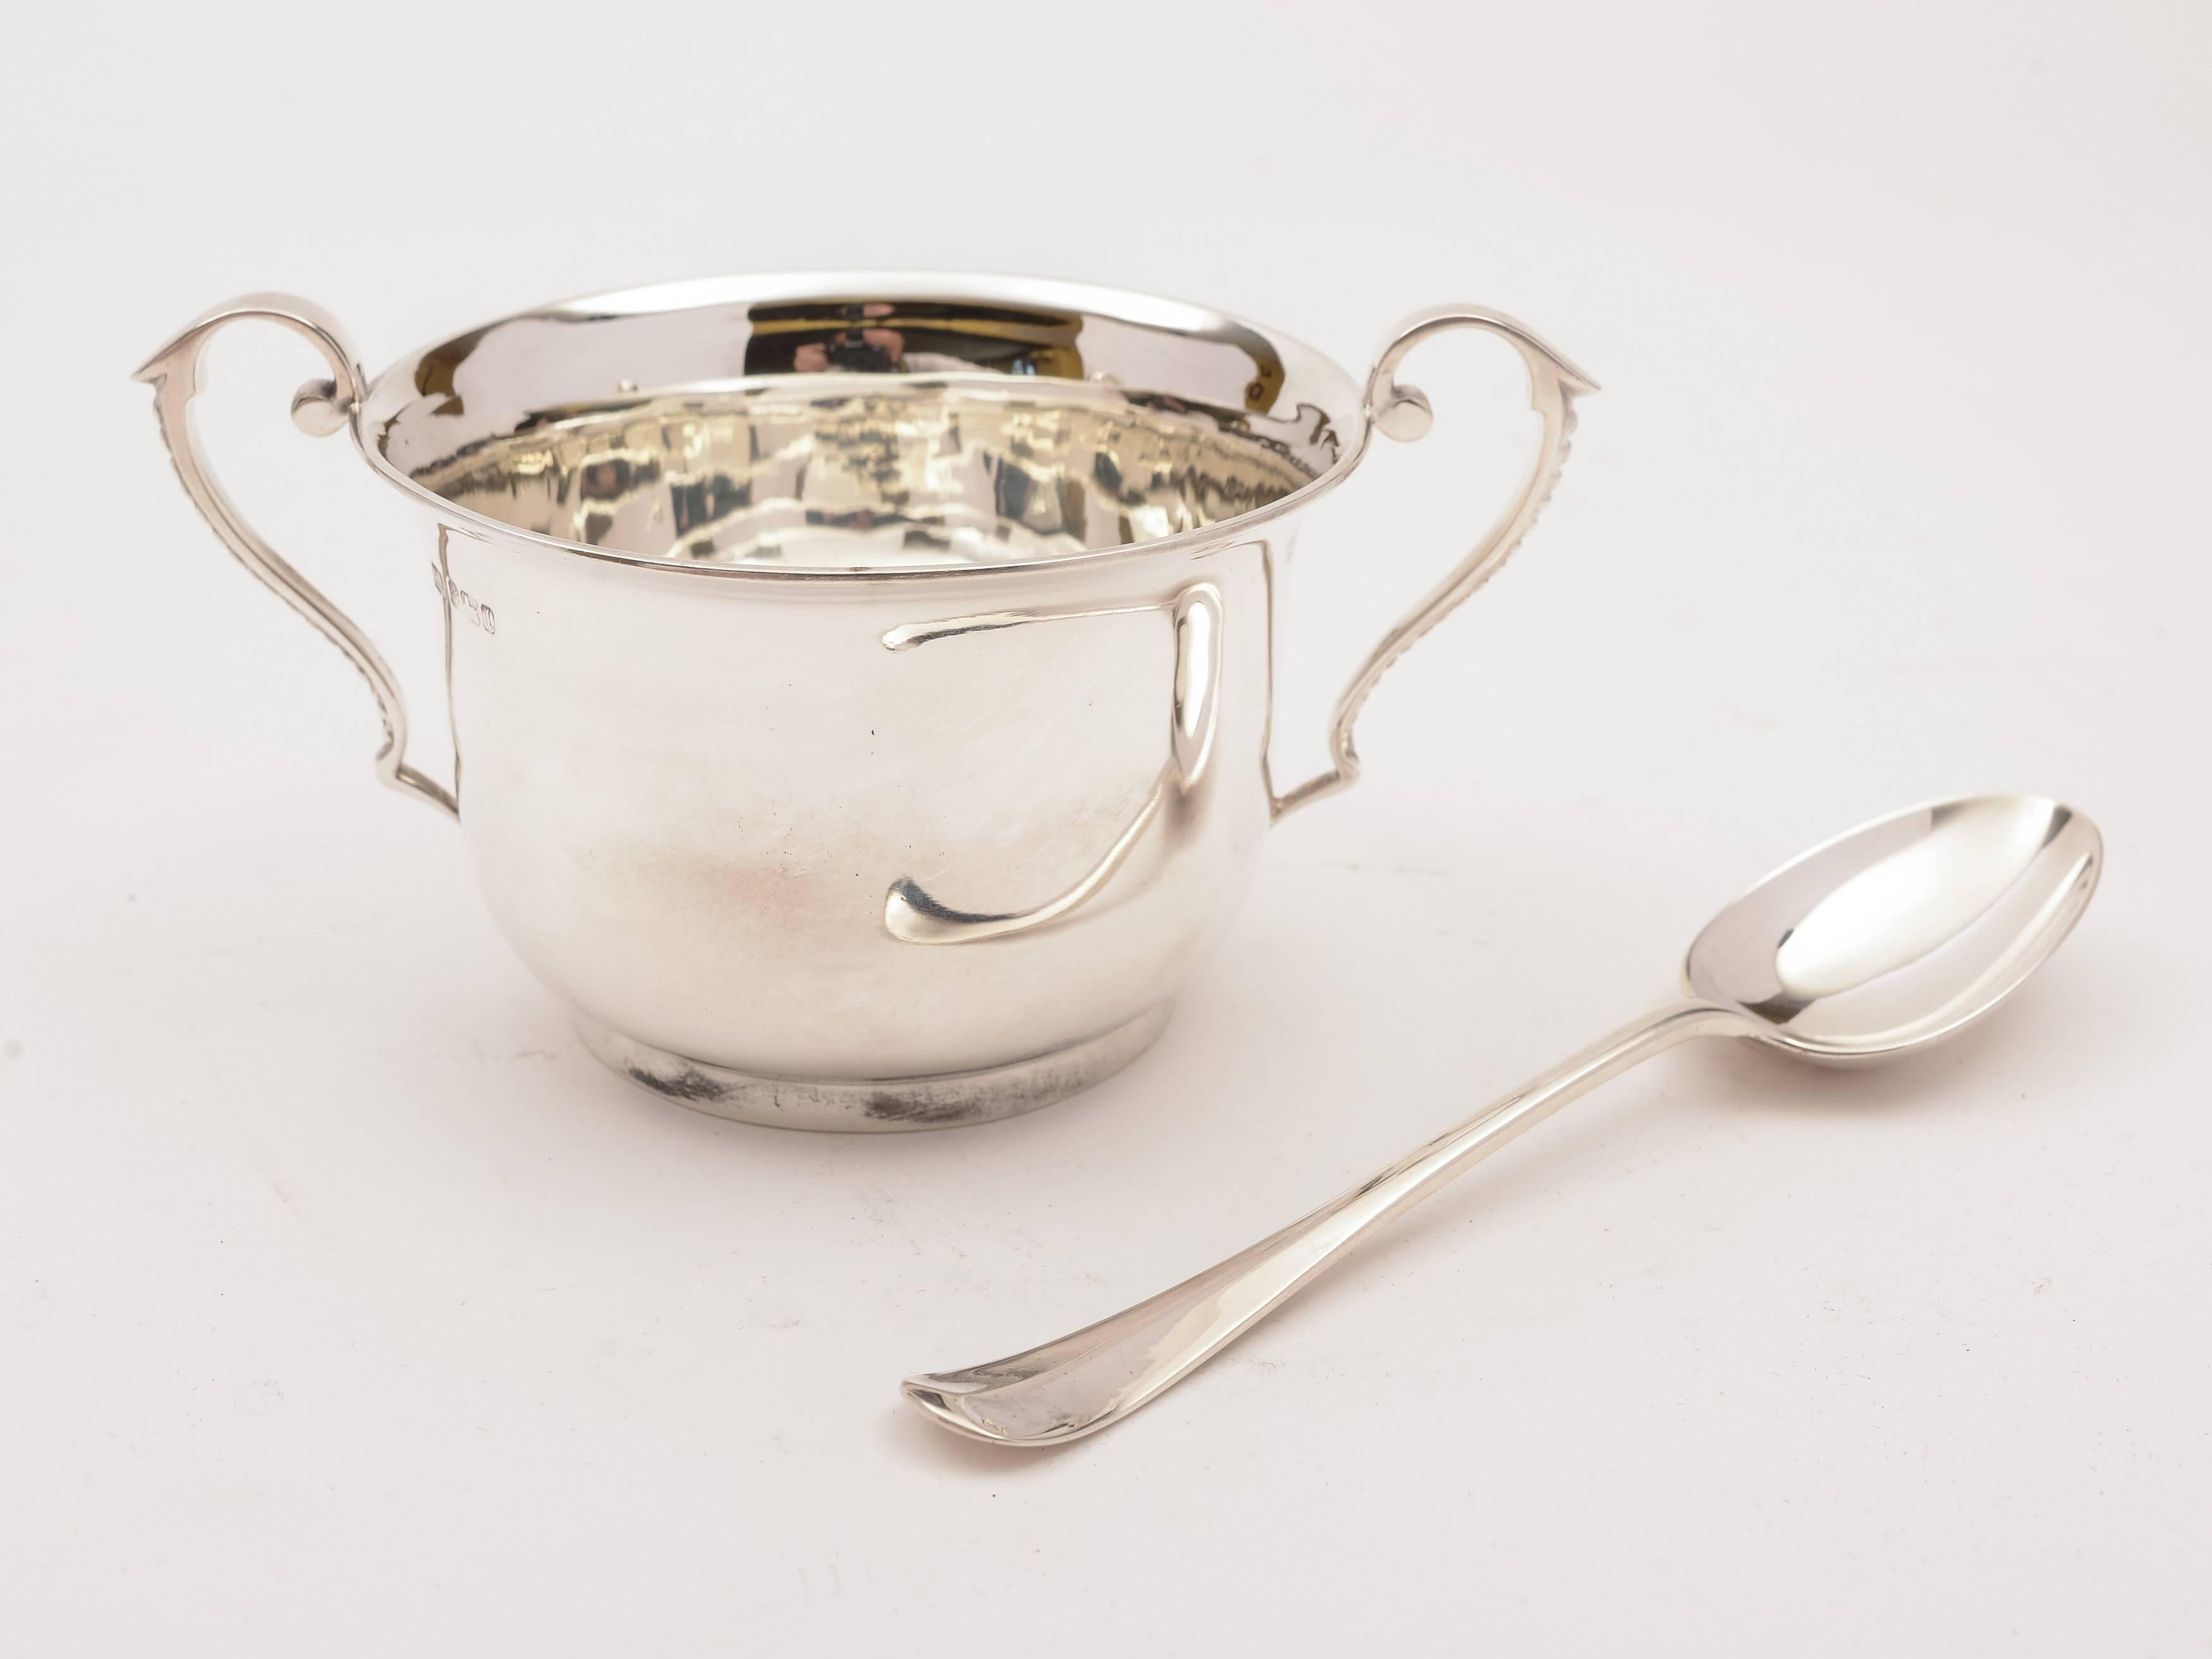 A lovely English Edwardian cased silver twin handled bowl with matching spoon. Presented in original velvet and silk lined case. Hallmarked Sheffield 1903 and marked 'HA' for the maker Atkin Brothers - Harry Atkins. 

  

Measurements:
Bowl